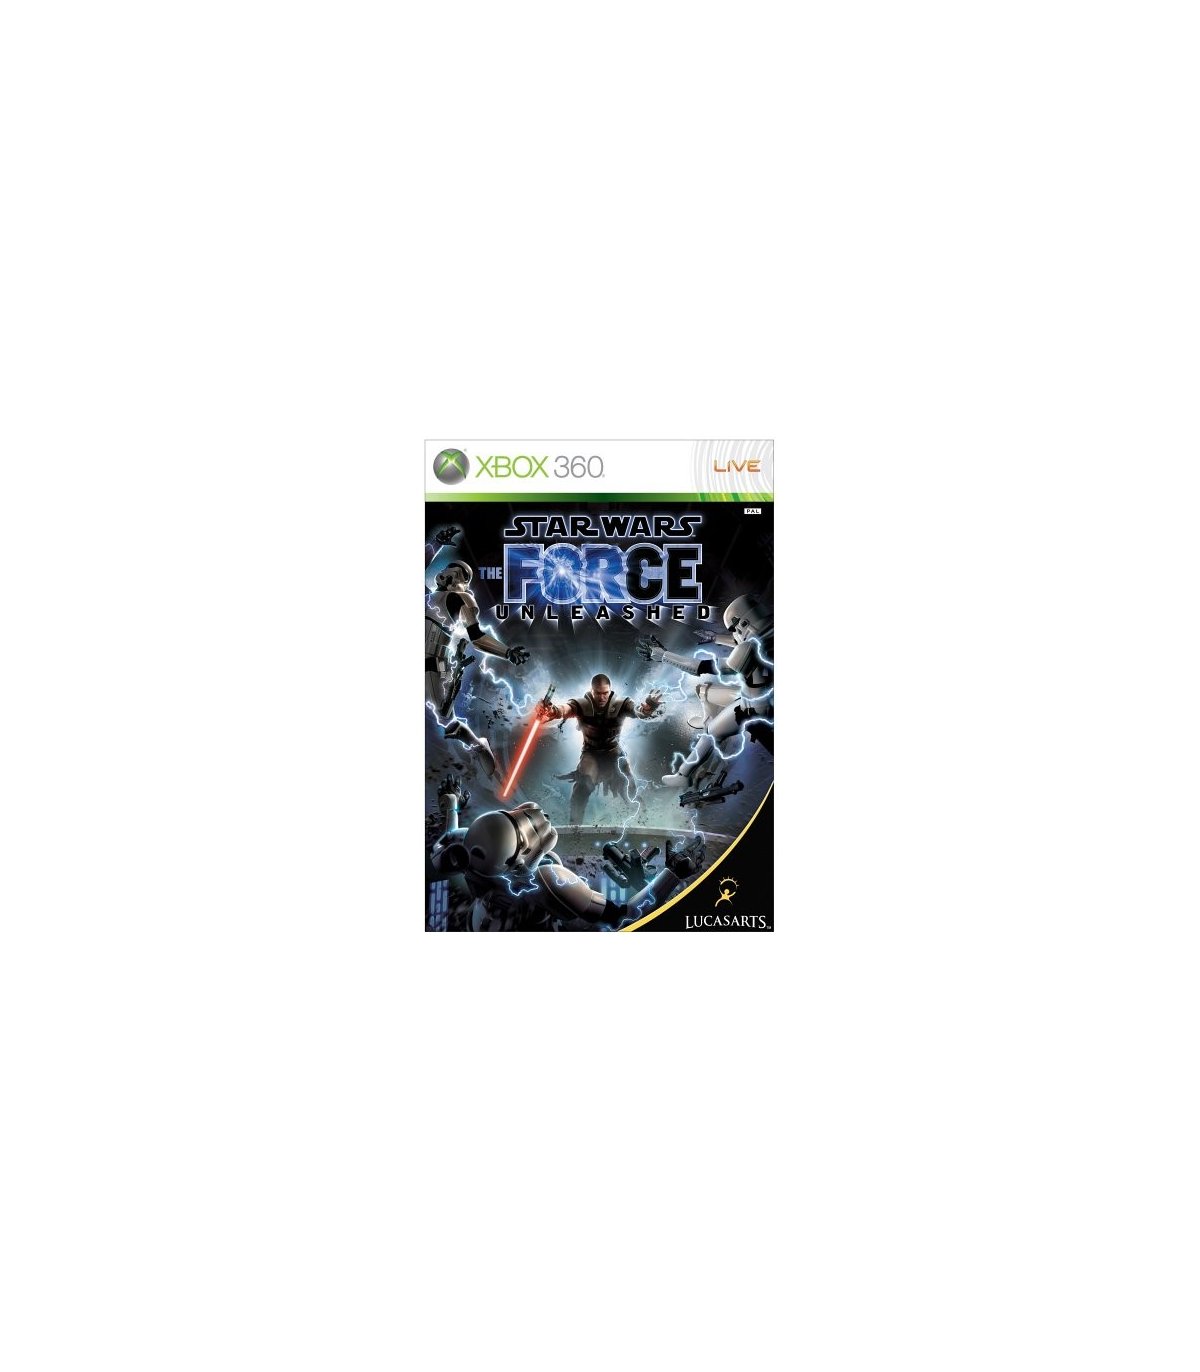 force unleashed codes xbox 360 invincibility